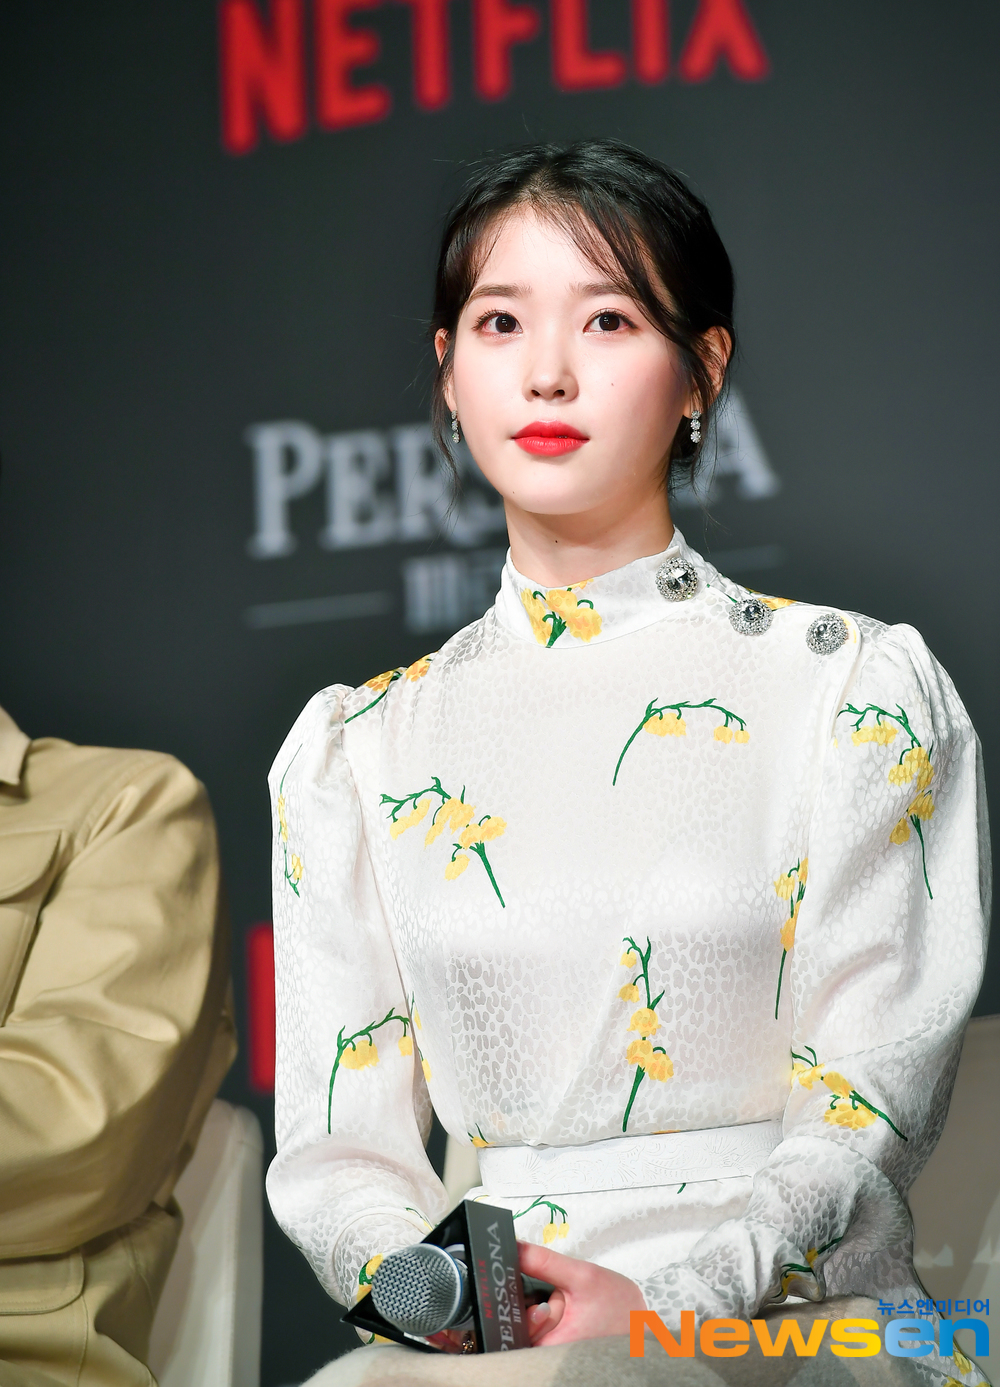 The Netflix original series Persona production meeting was held in Conrad Seoul, Yeouido on the morning of March 27th.On this day, Lee Ji-eun (IU), Yoon Jong-shin, Im Pil-sung, Jeon Go-un and Kim Jong-kwan attended.Persona consists of four works made by four directors who are full of talent and Personality.In it, one muse turns into four Personas, sometimes cute and sometimes strangely talk about life and love.Lee Jae-ha